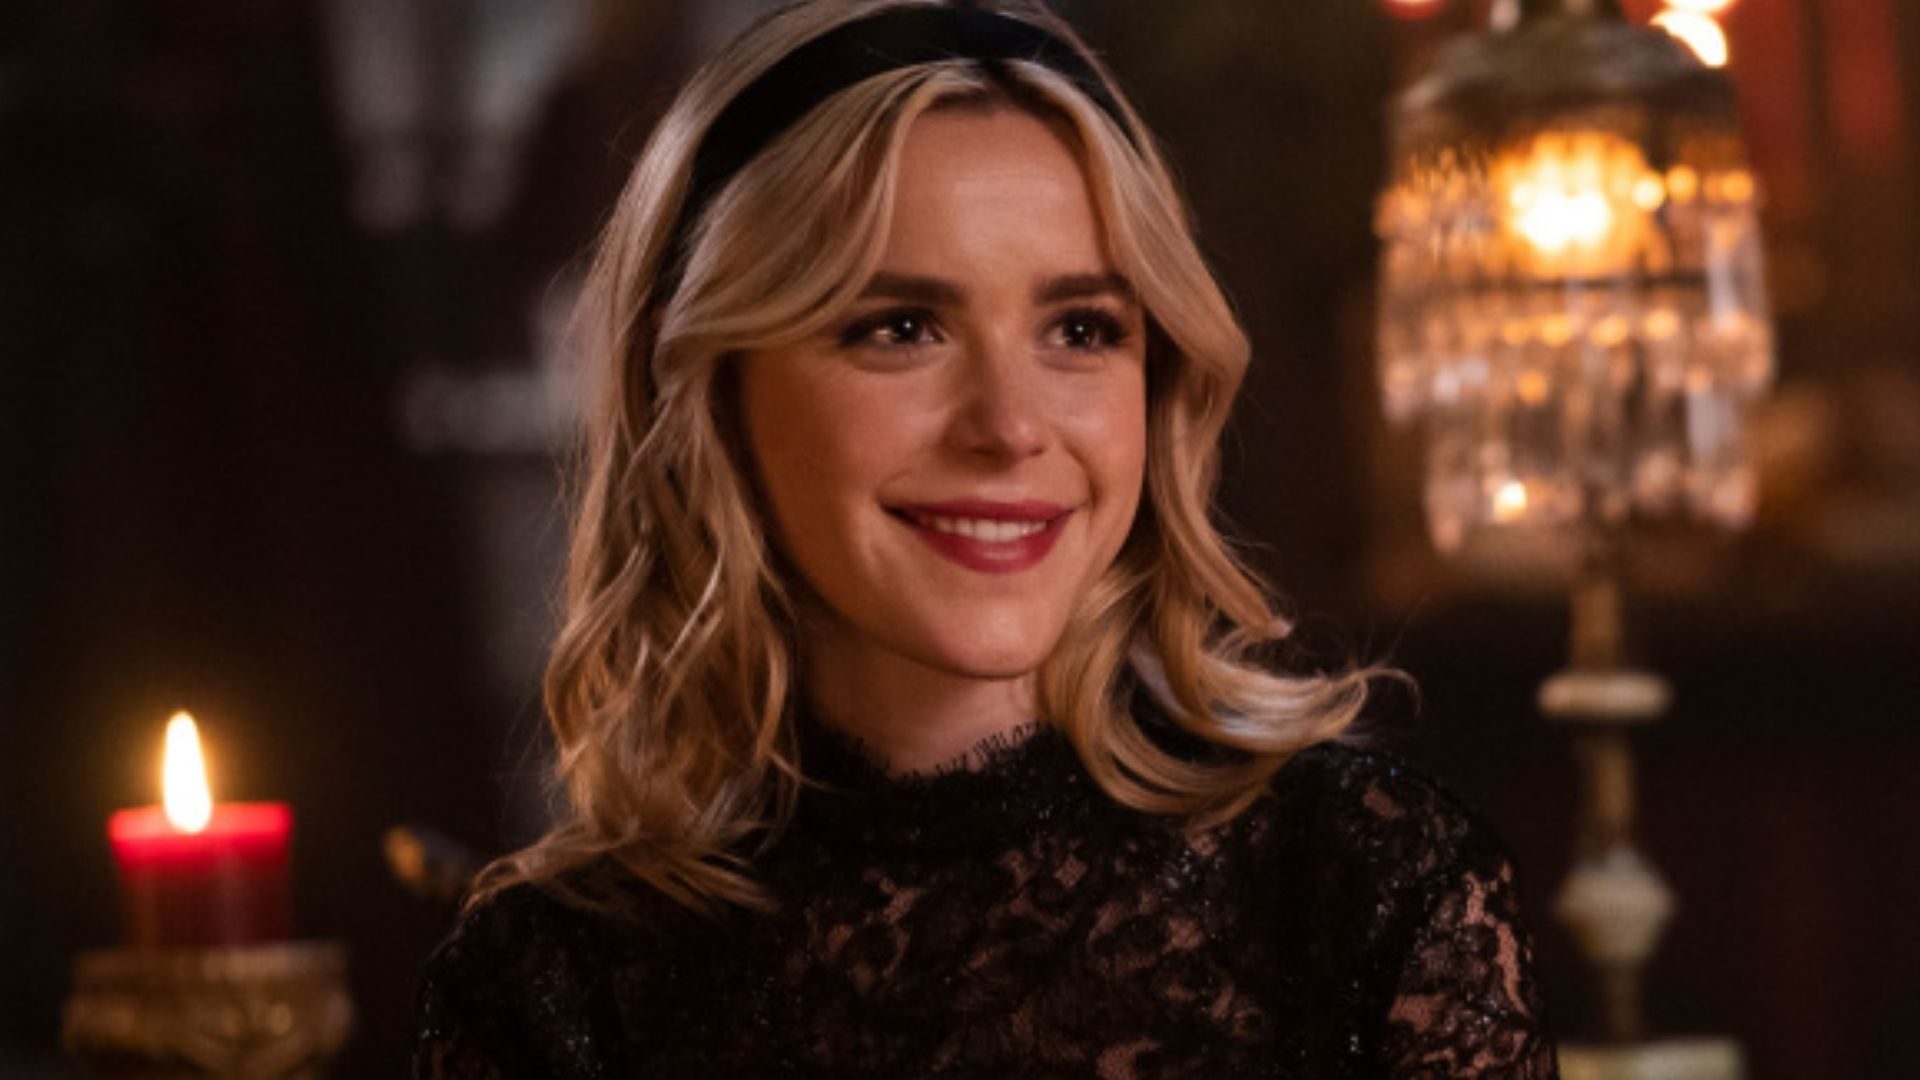 Riverdale: Confira sinopse e imagens do episódio 6×04 “Chapter Ninety-Nine: The Witching Hour(s).”